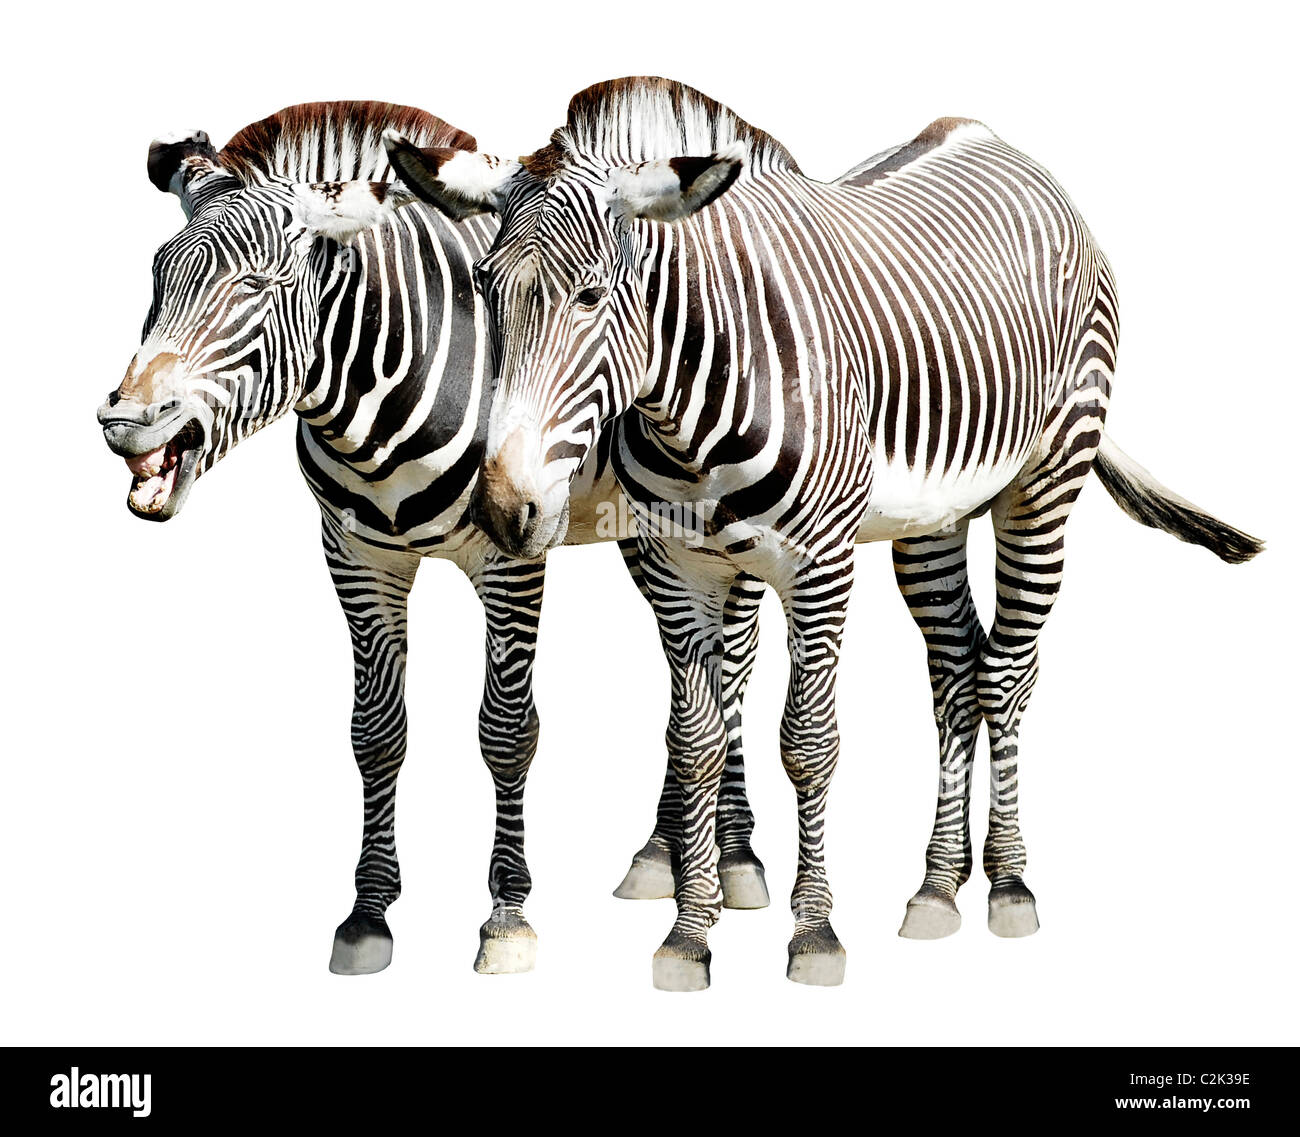 Two zebras of Grevy (Equus grevyi) standing isolated on white background Stock Photo